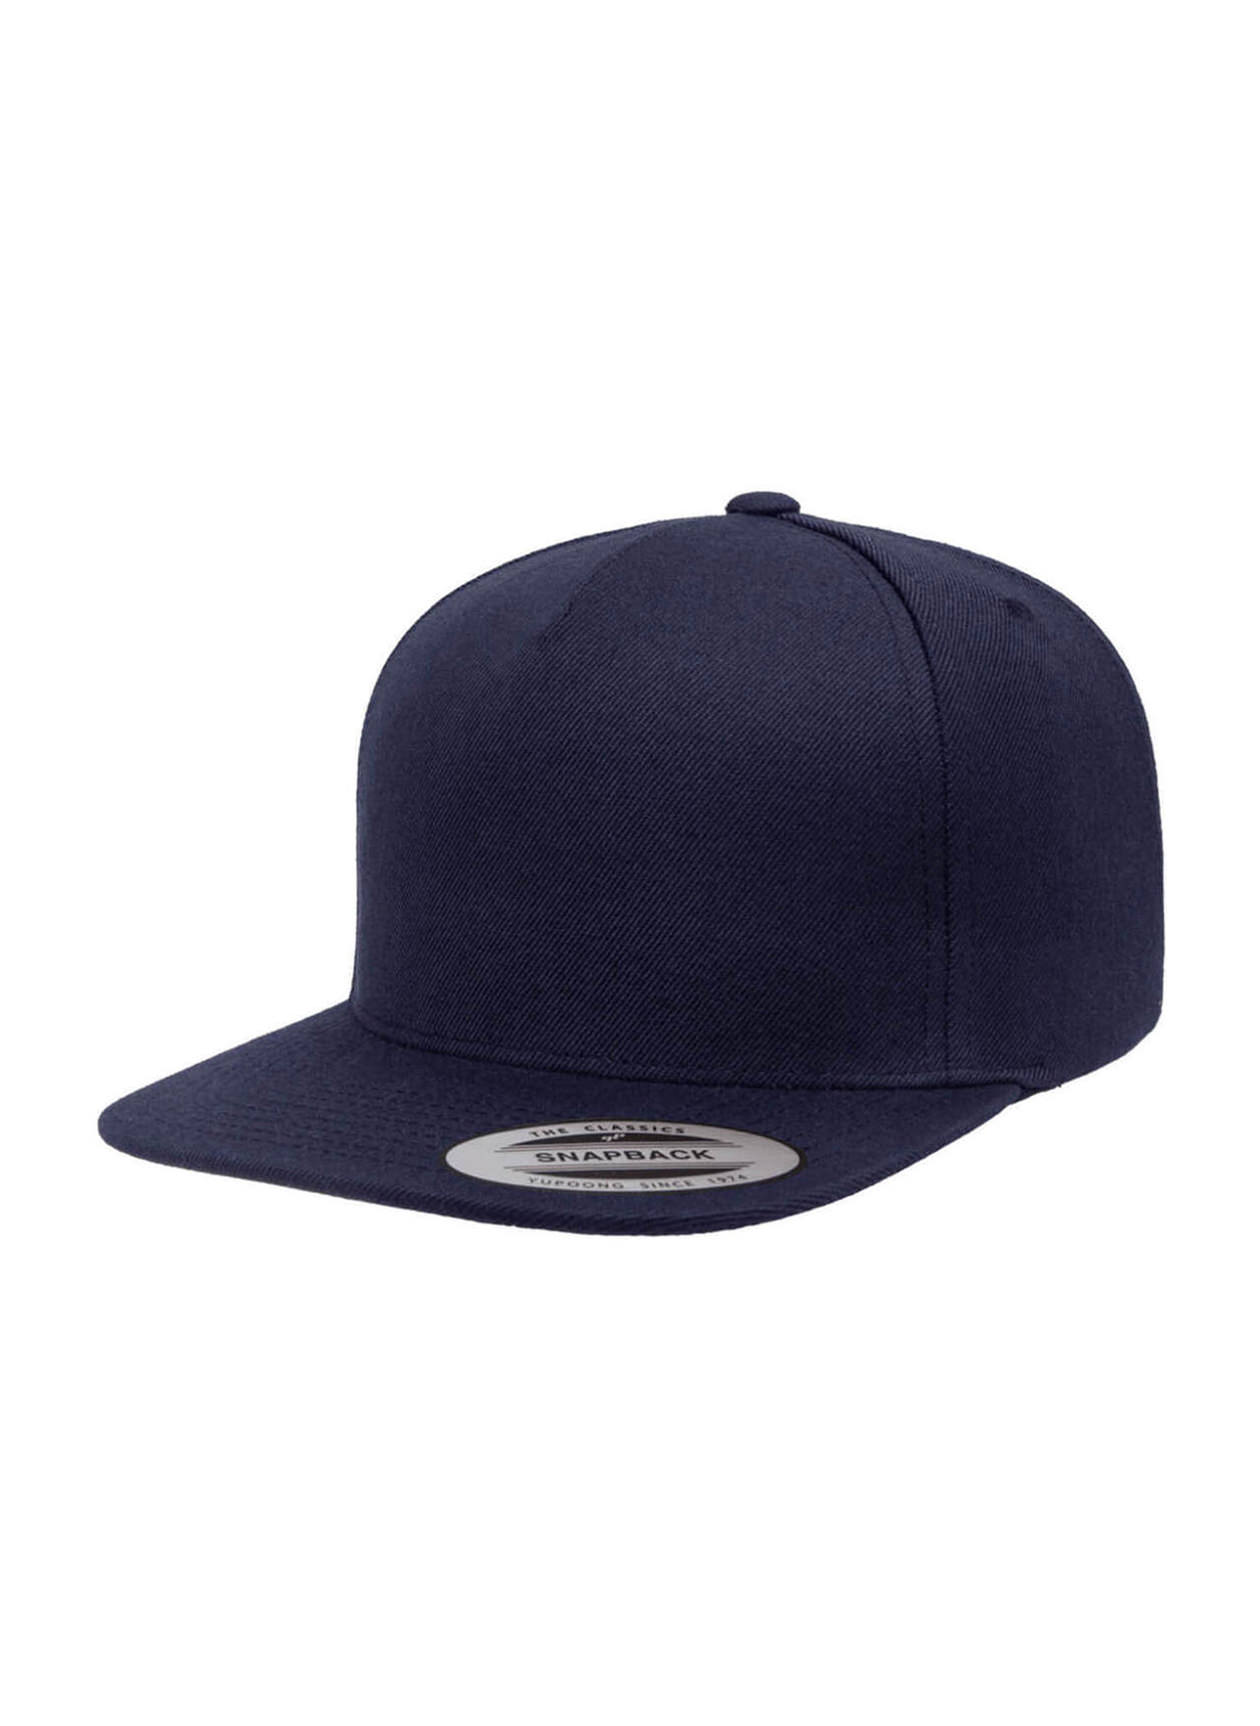 Yupoong Navy 5-Panel Structured Flat Visor Classic Snapback Hat